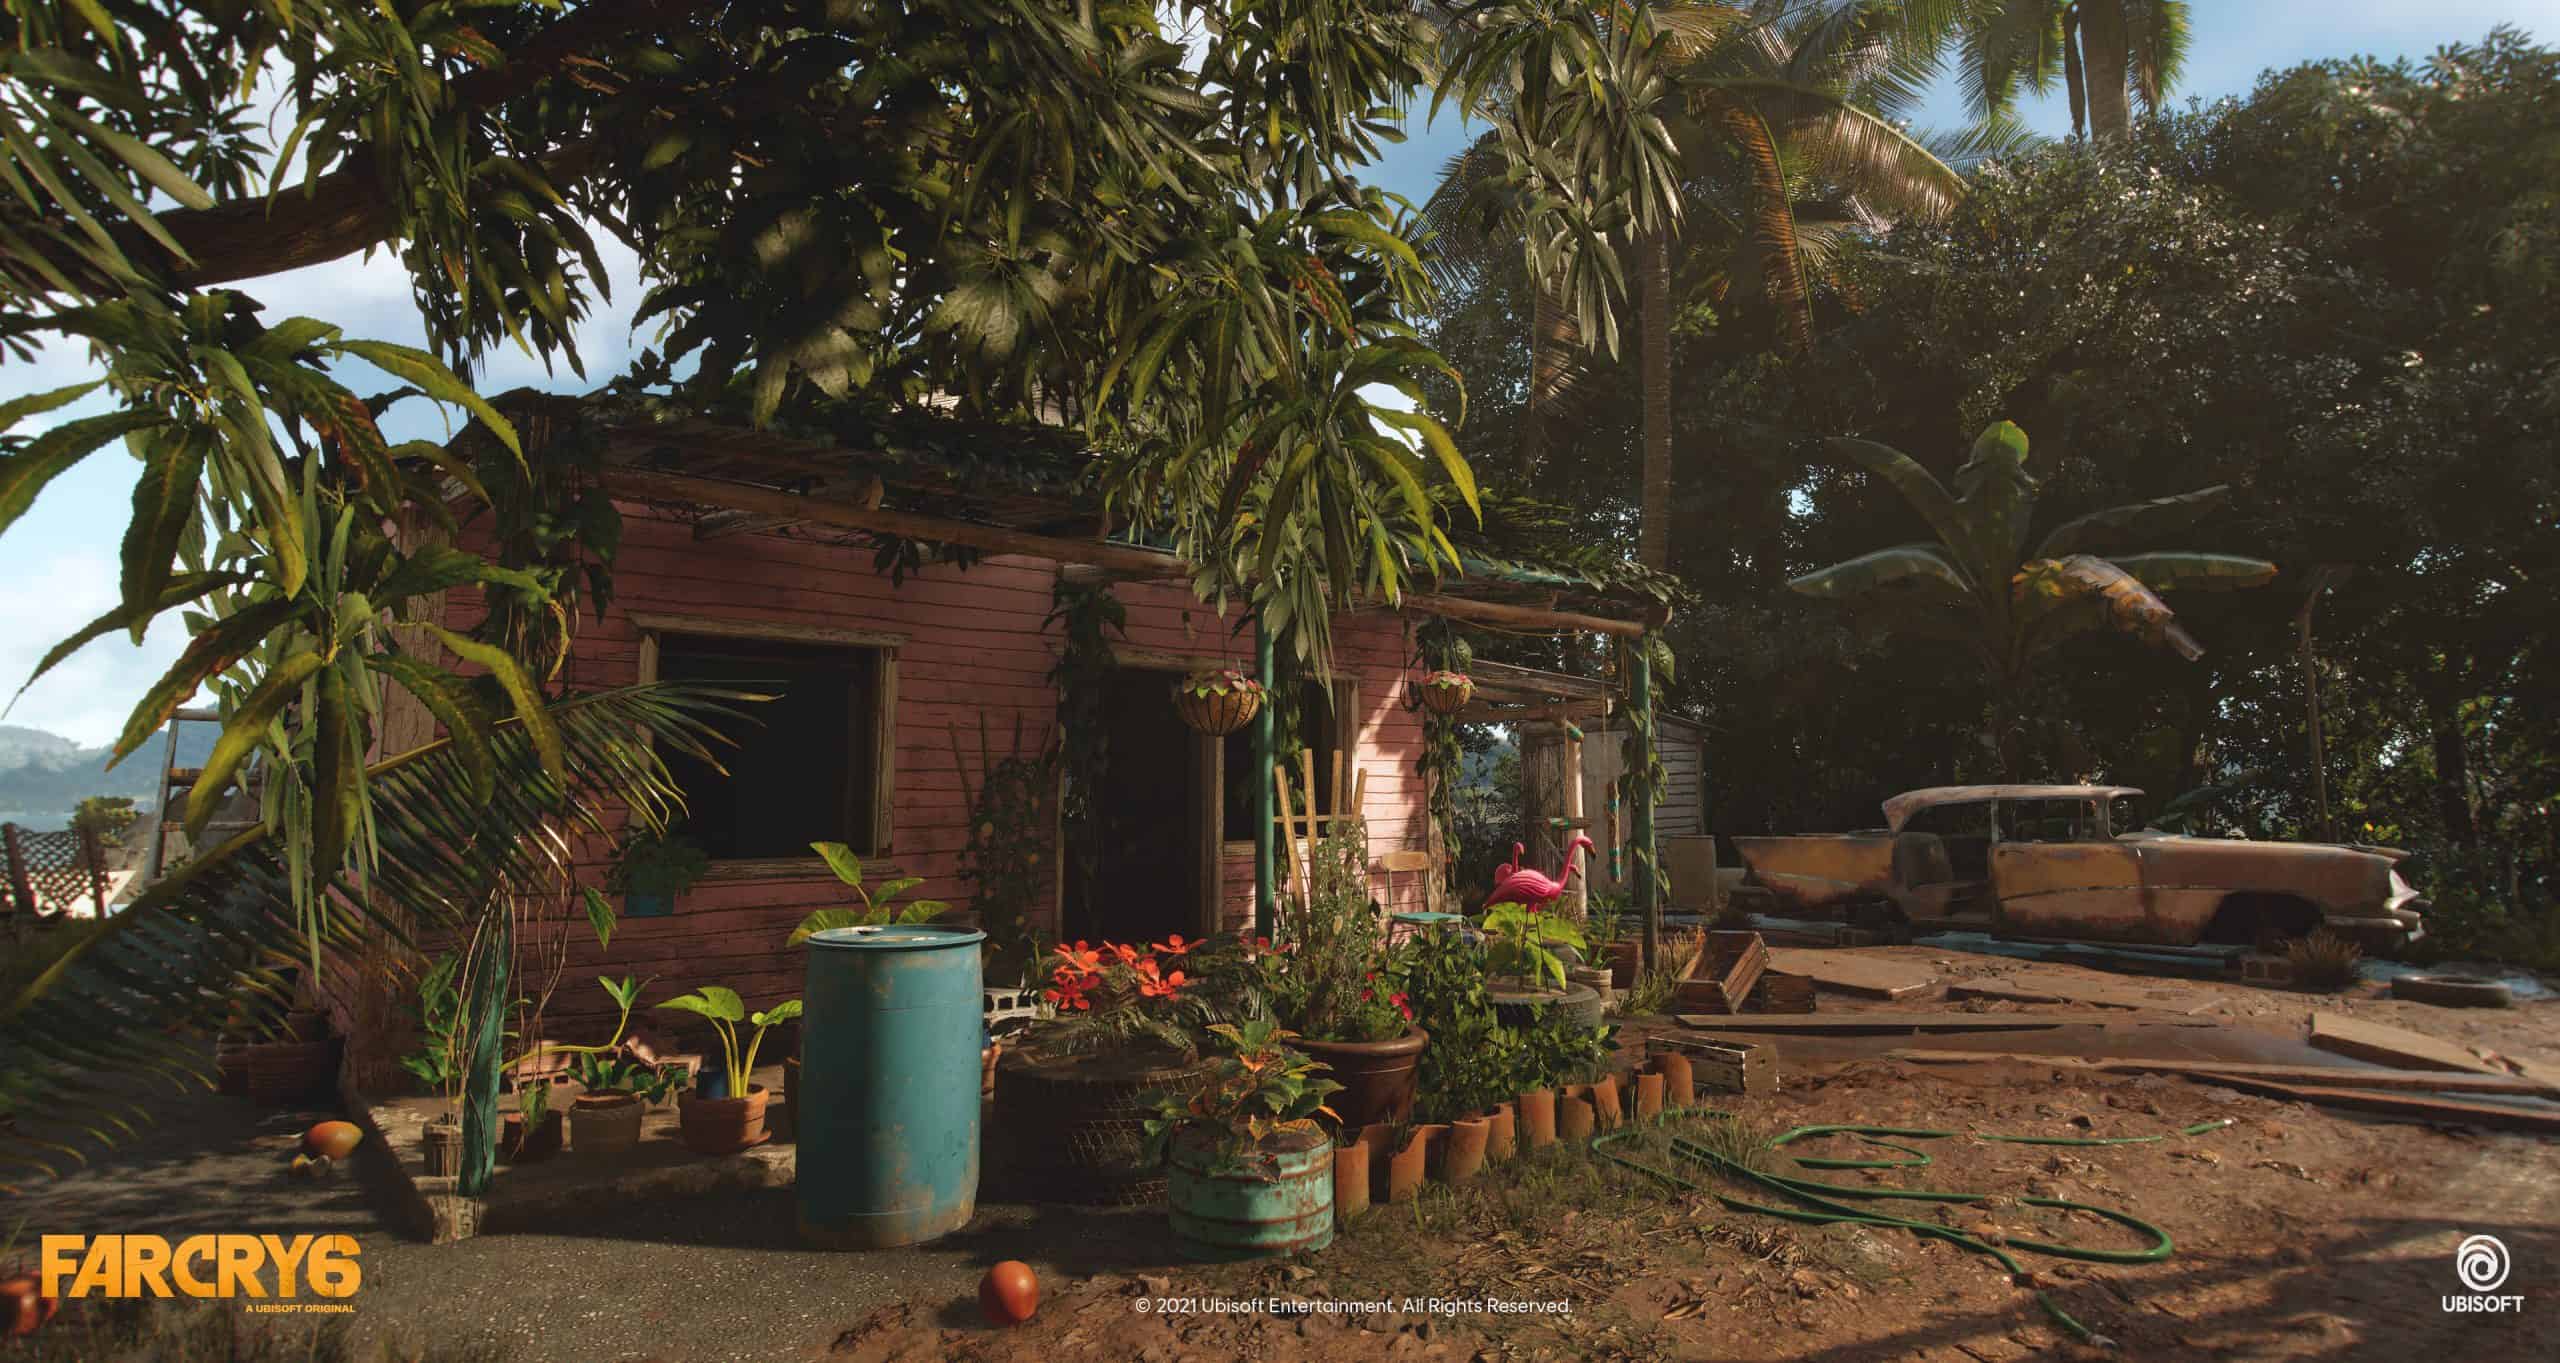 Far Cry 6 art, pink house with plants and plastic lawn flamingoes